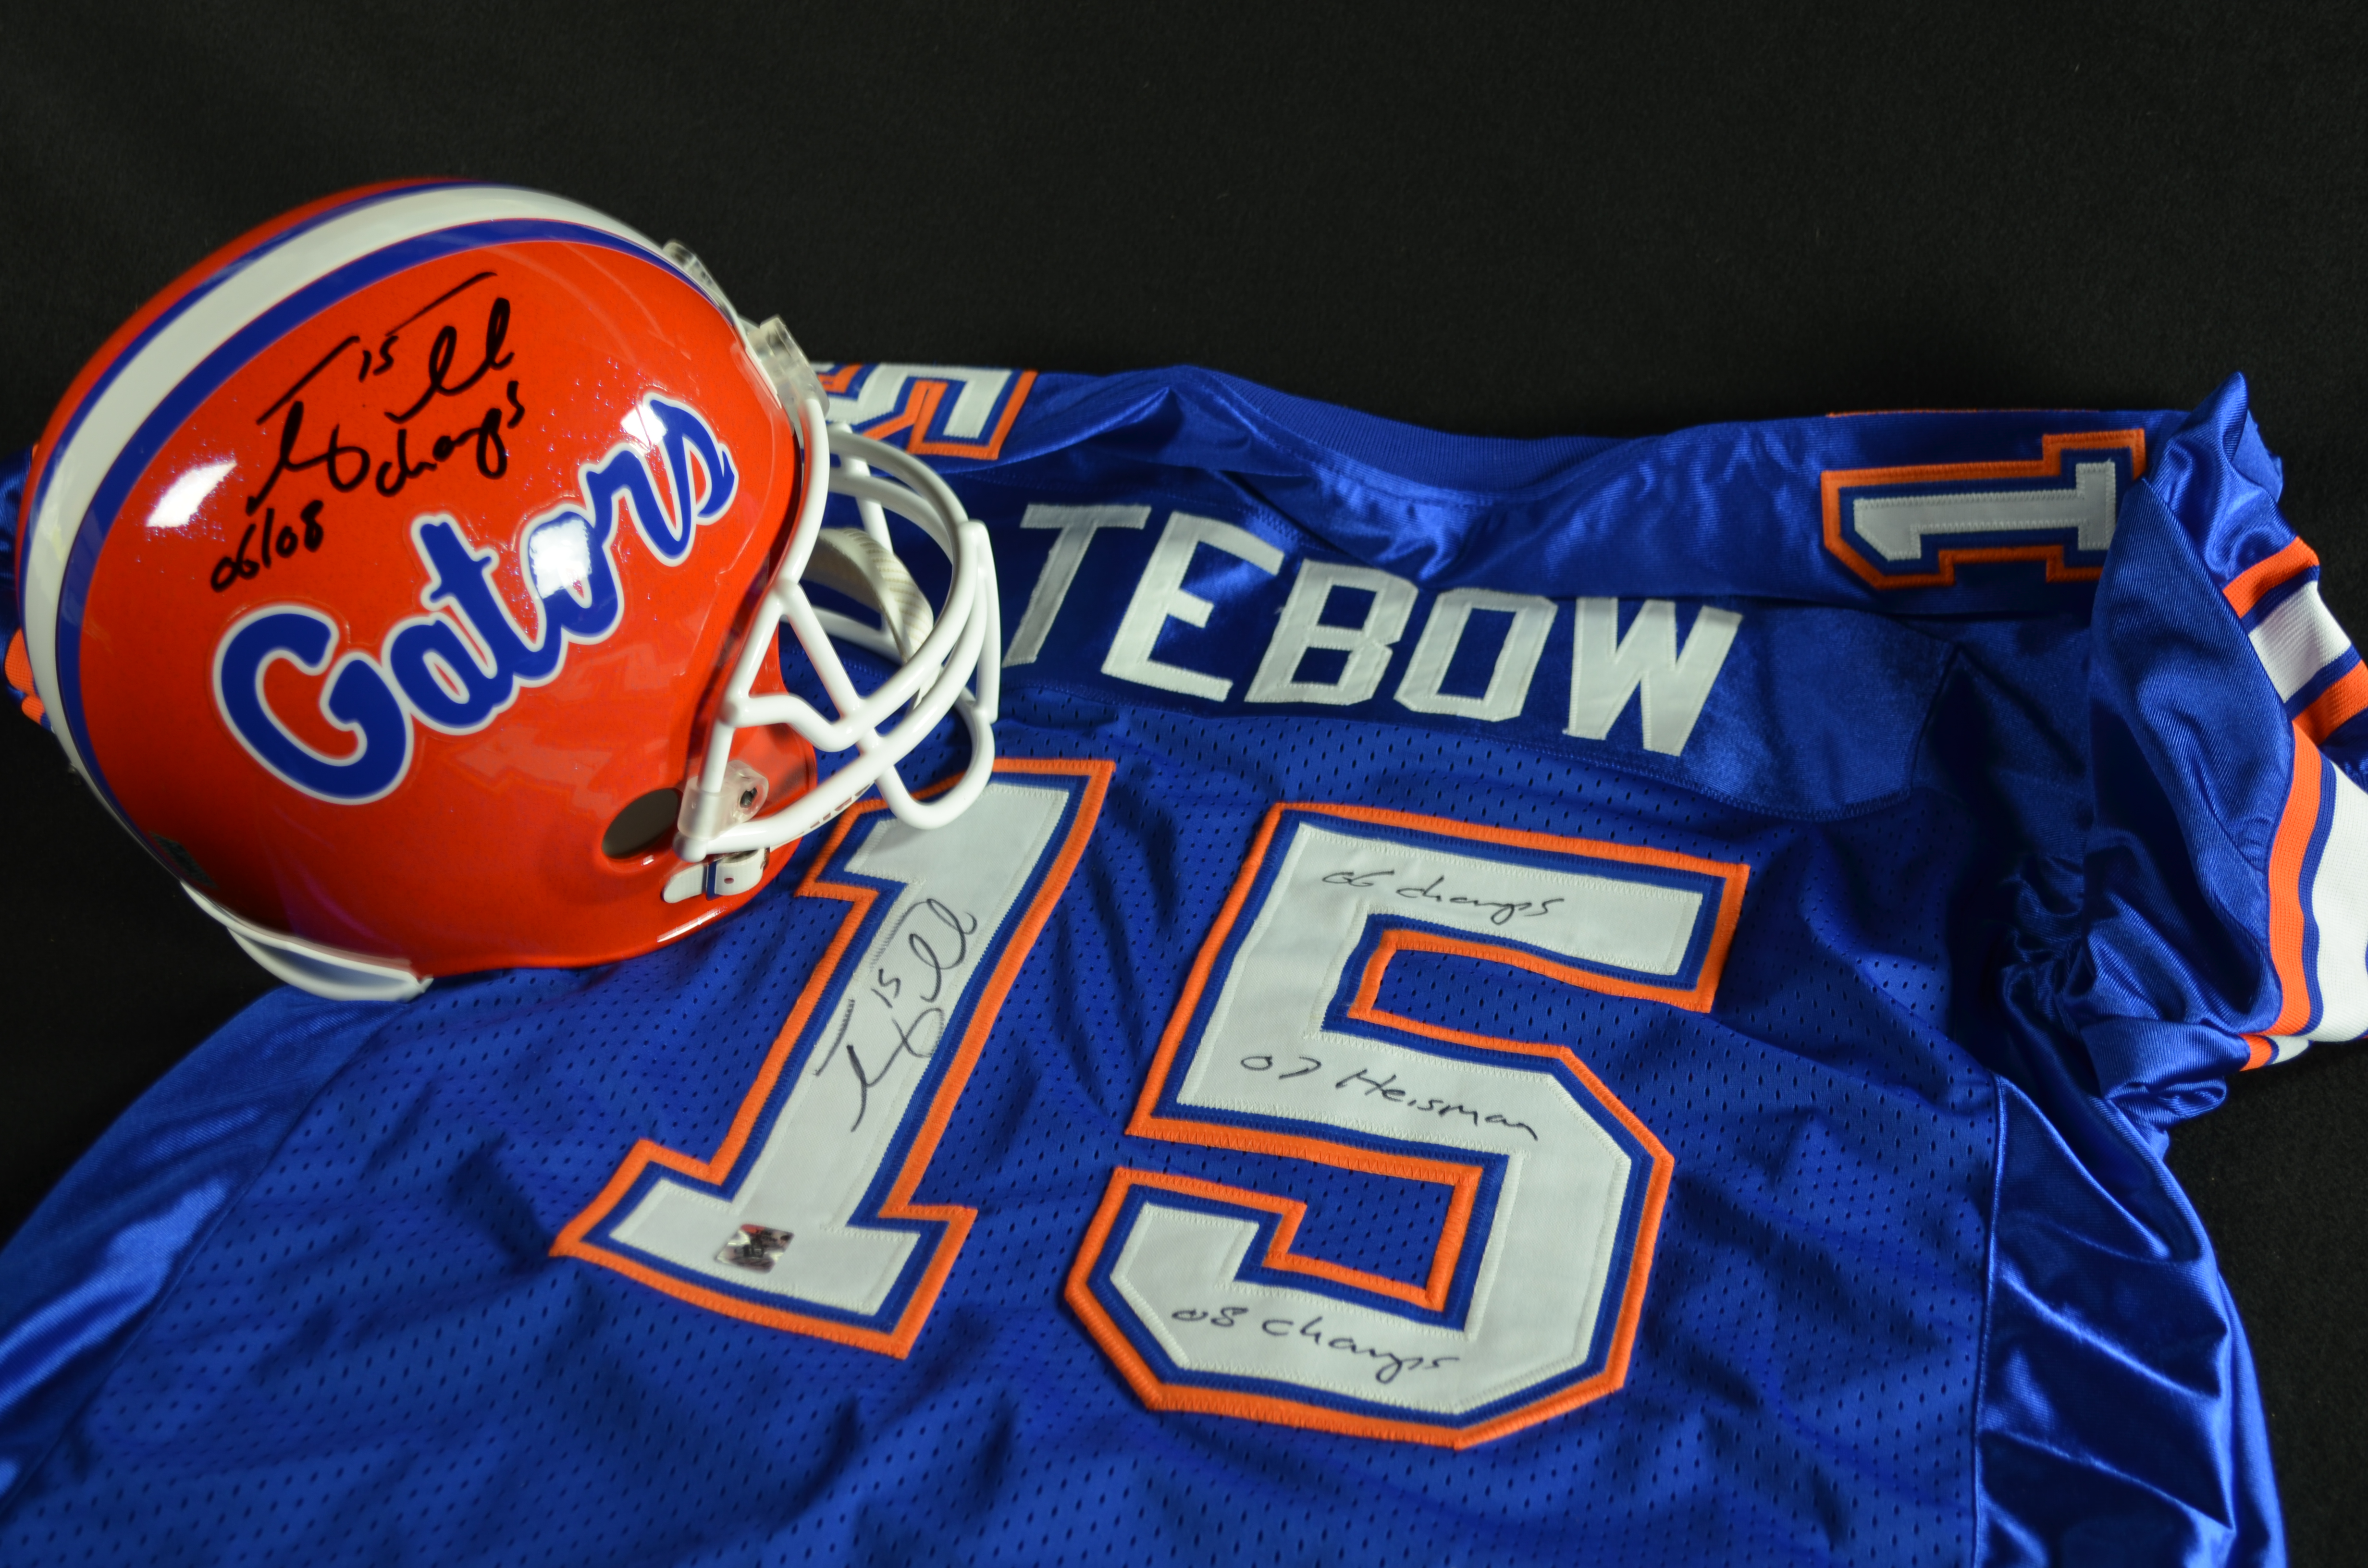 tim tebow autographed jersey